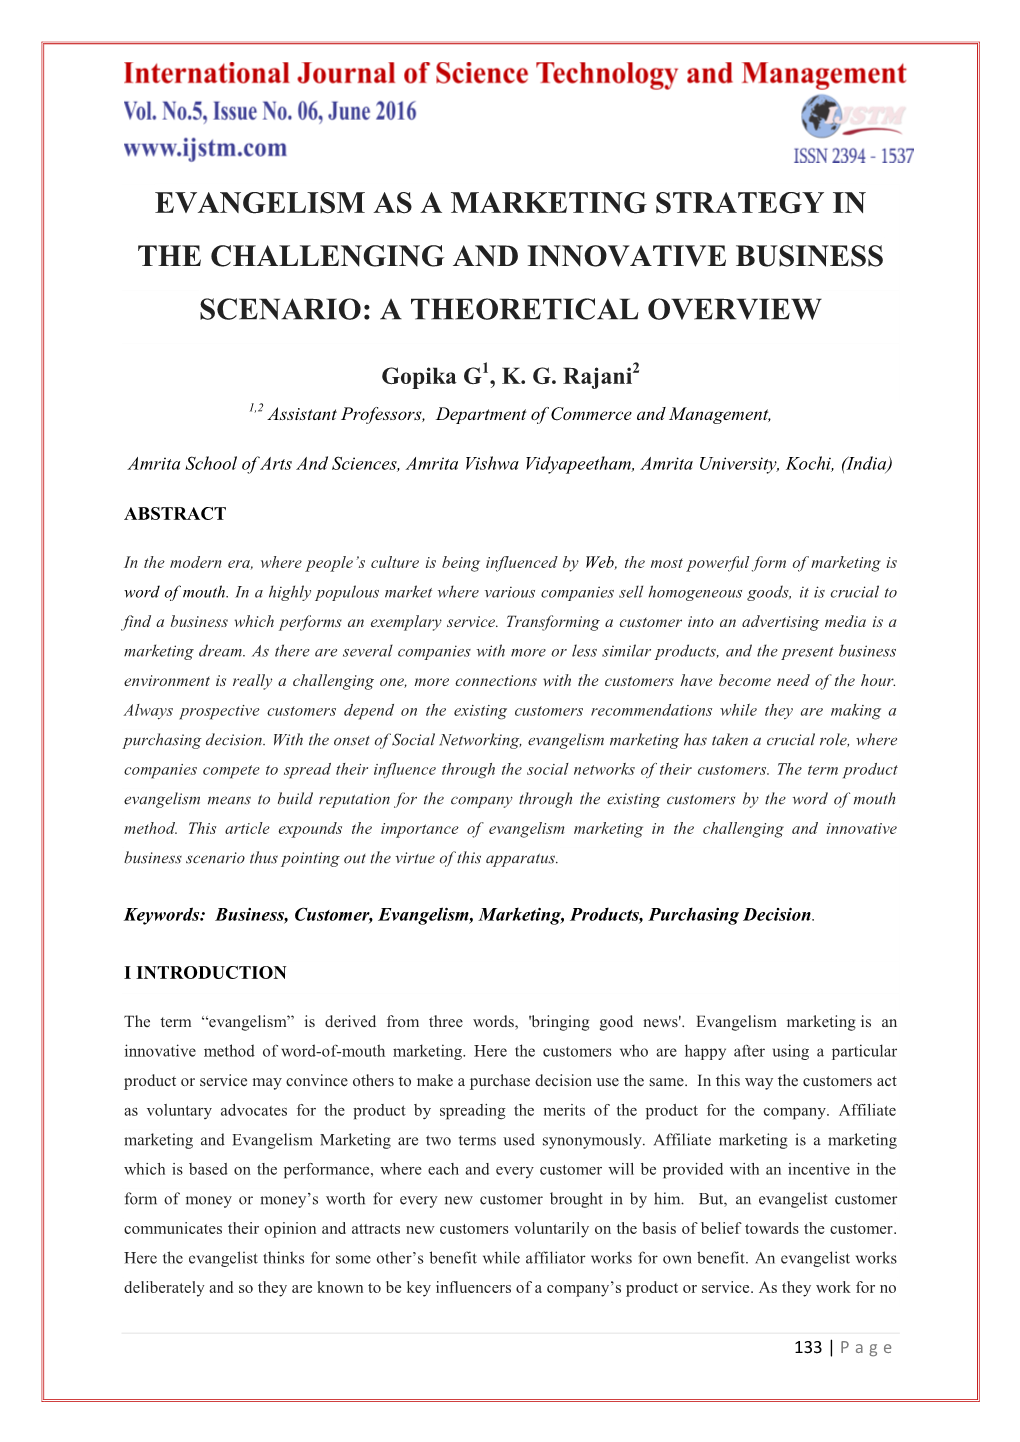 Evangelism As a Marketing Strategy in the Challenging and Innovative Business Scenario: a Theoretical Overview